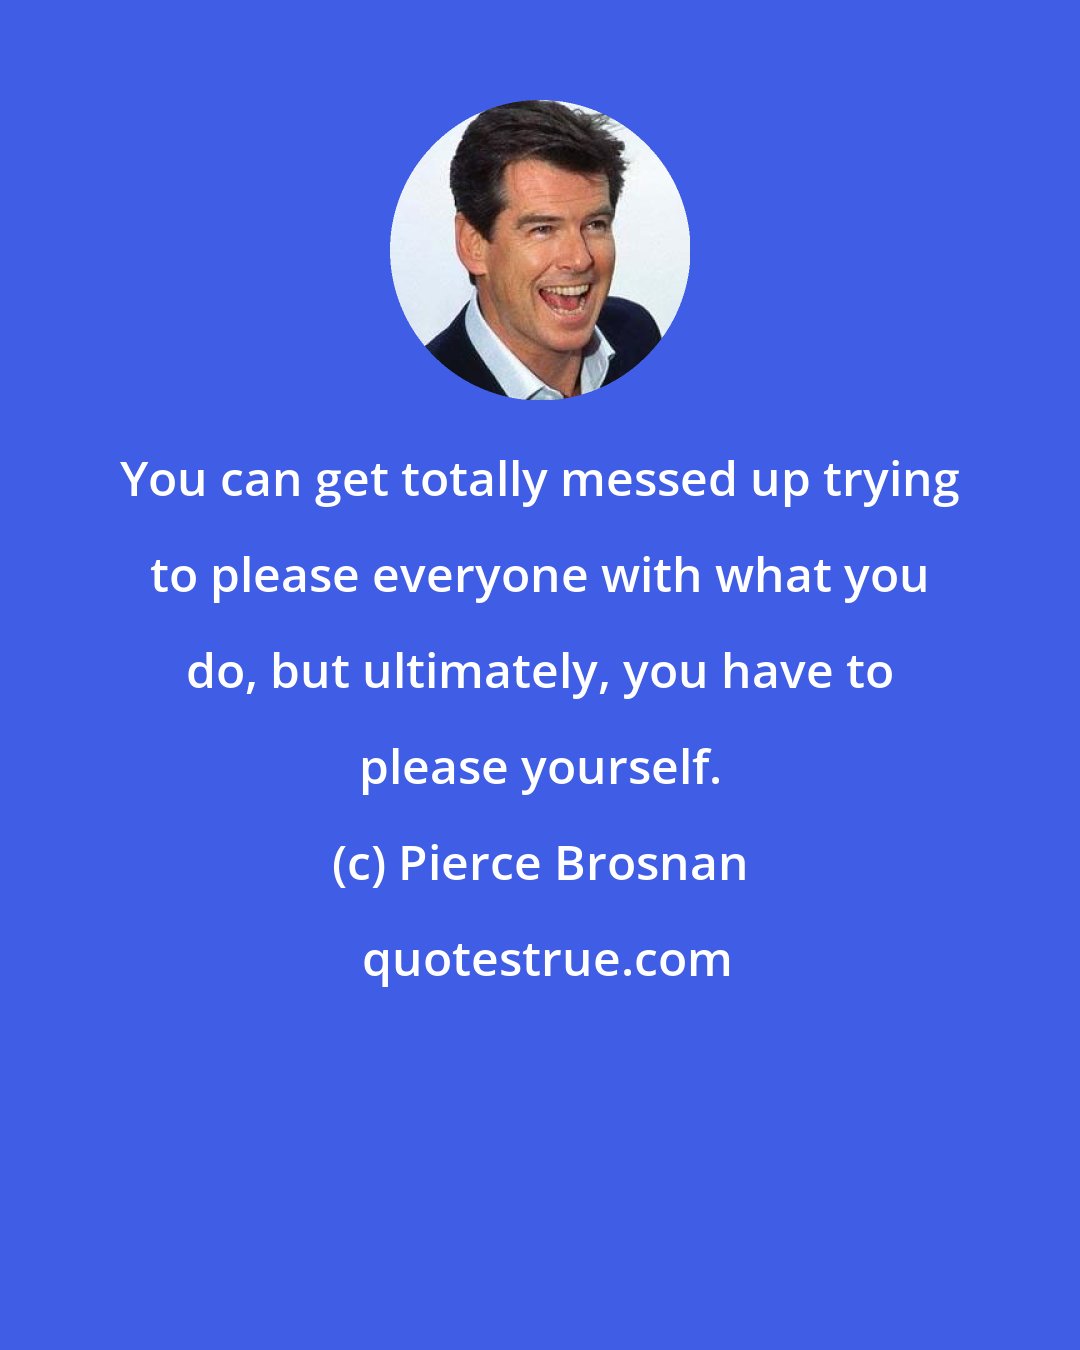 Pierce Brosnan: You can get totally messed up trying to please everyone with what you do, but ultimately, you have to please yourself.